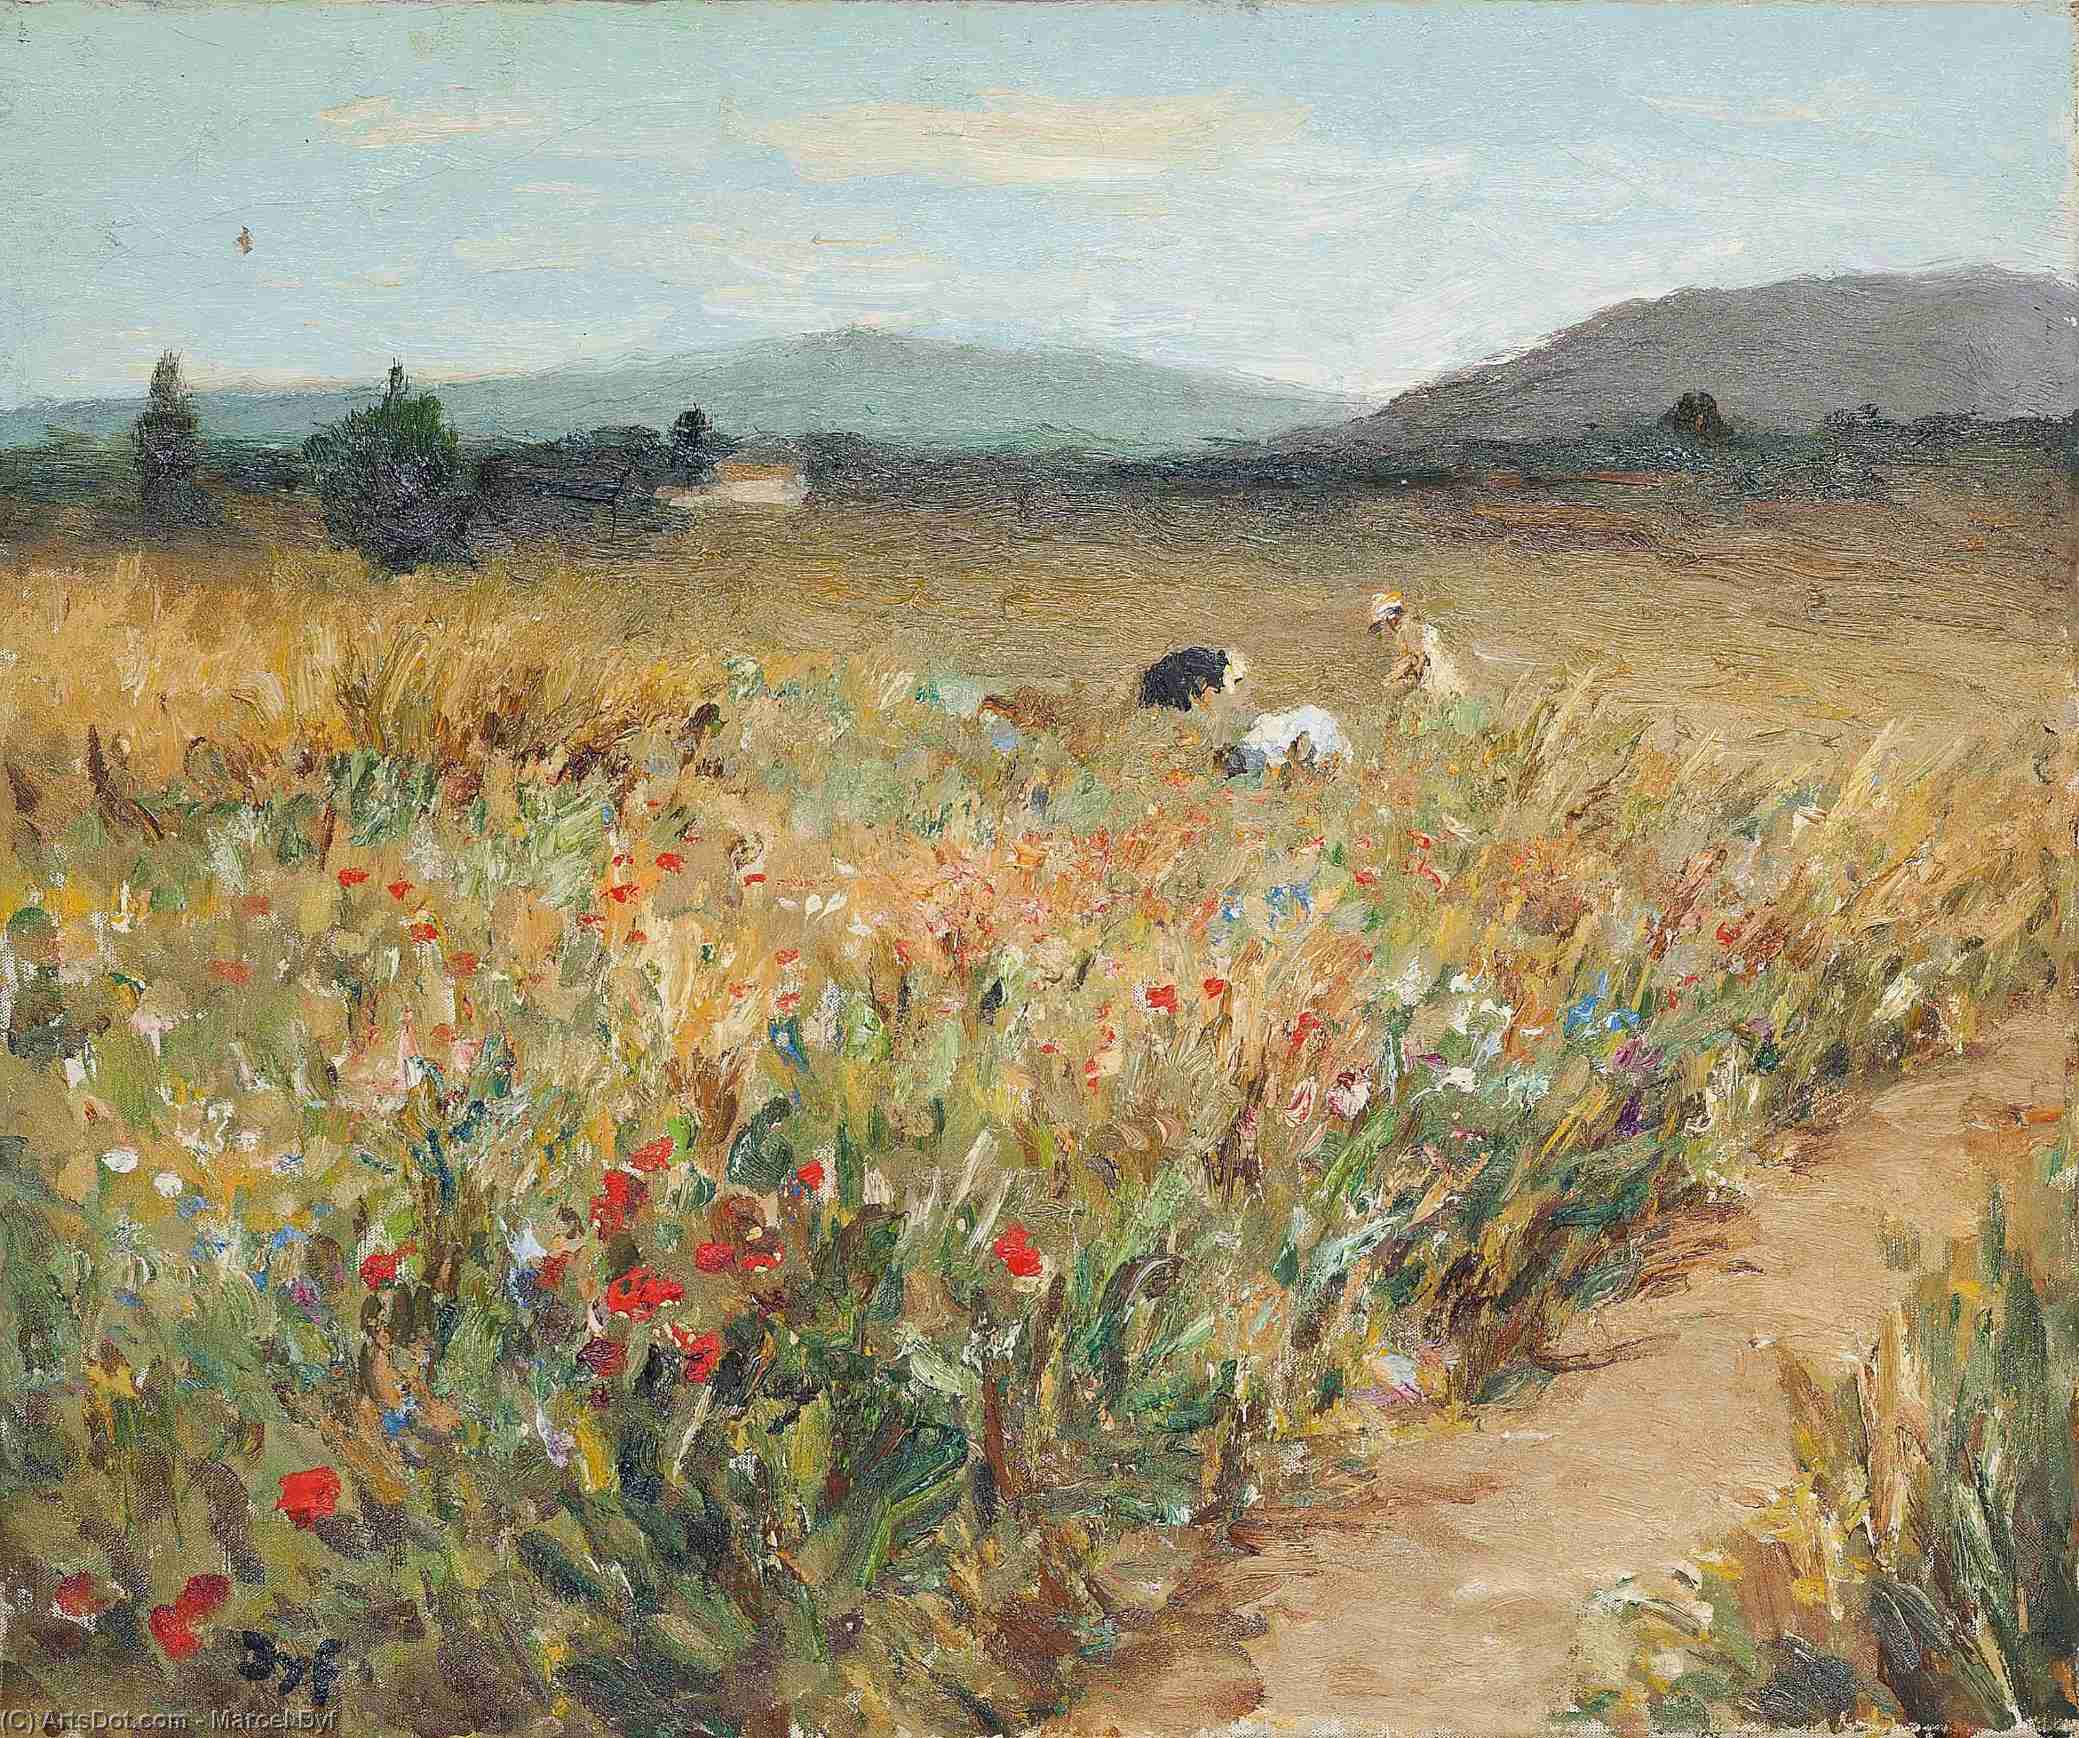 WikiOO.org - Encyclopedia of Fine Arts - Malba, Artwork Marcel Dyf - Figures among the Flowers in Provence, (1950)